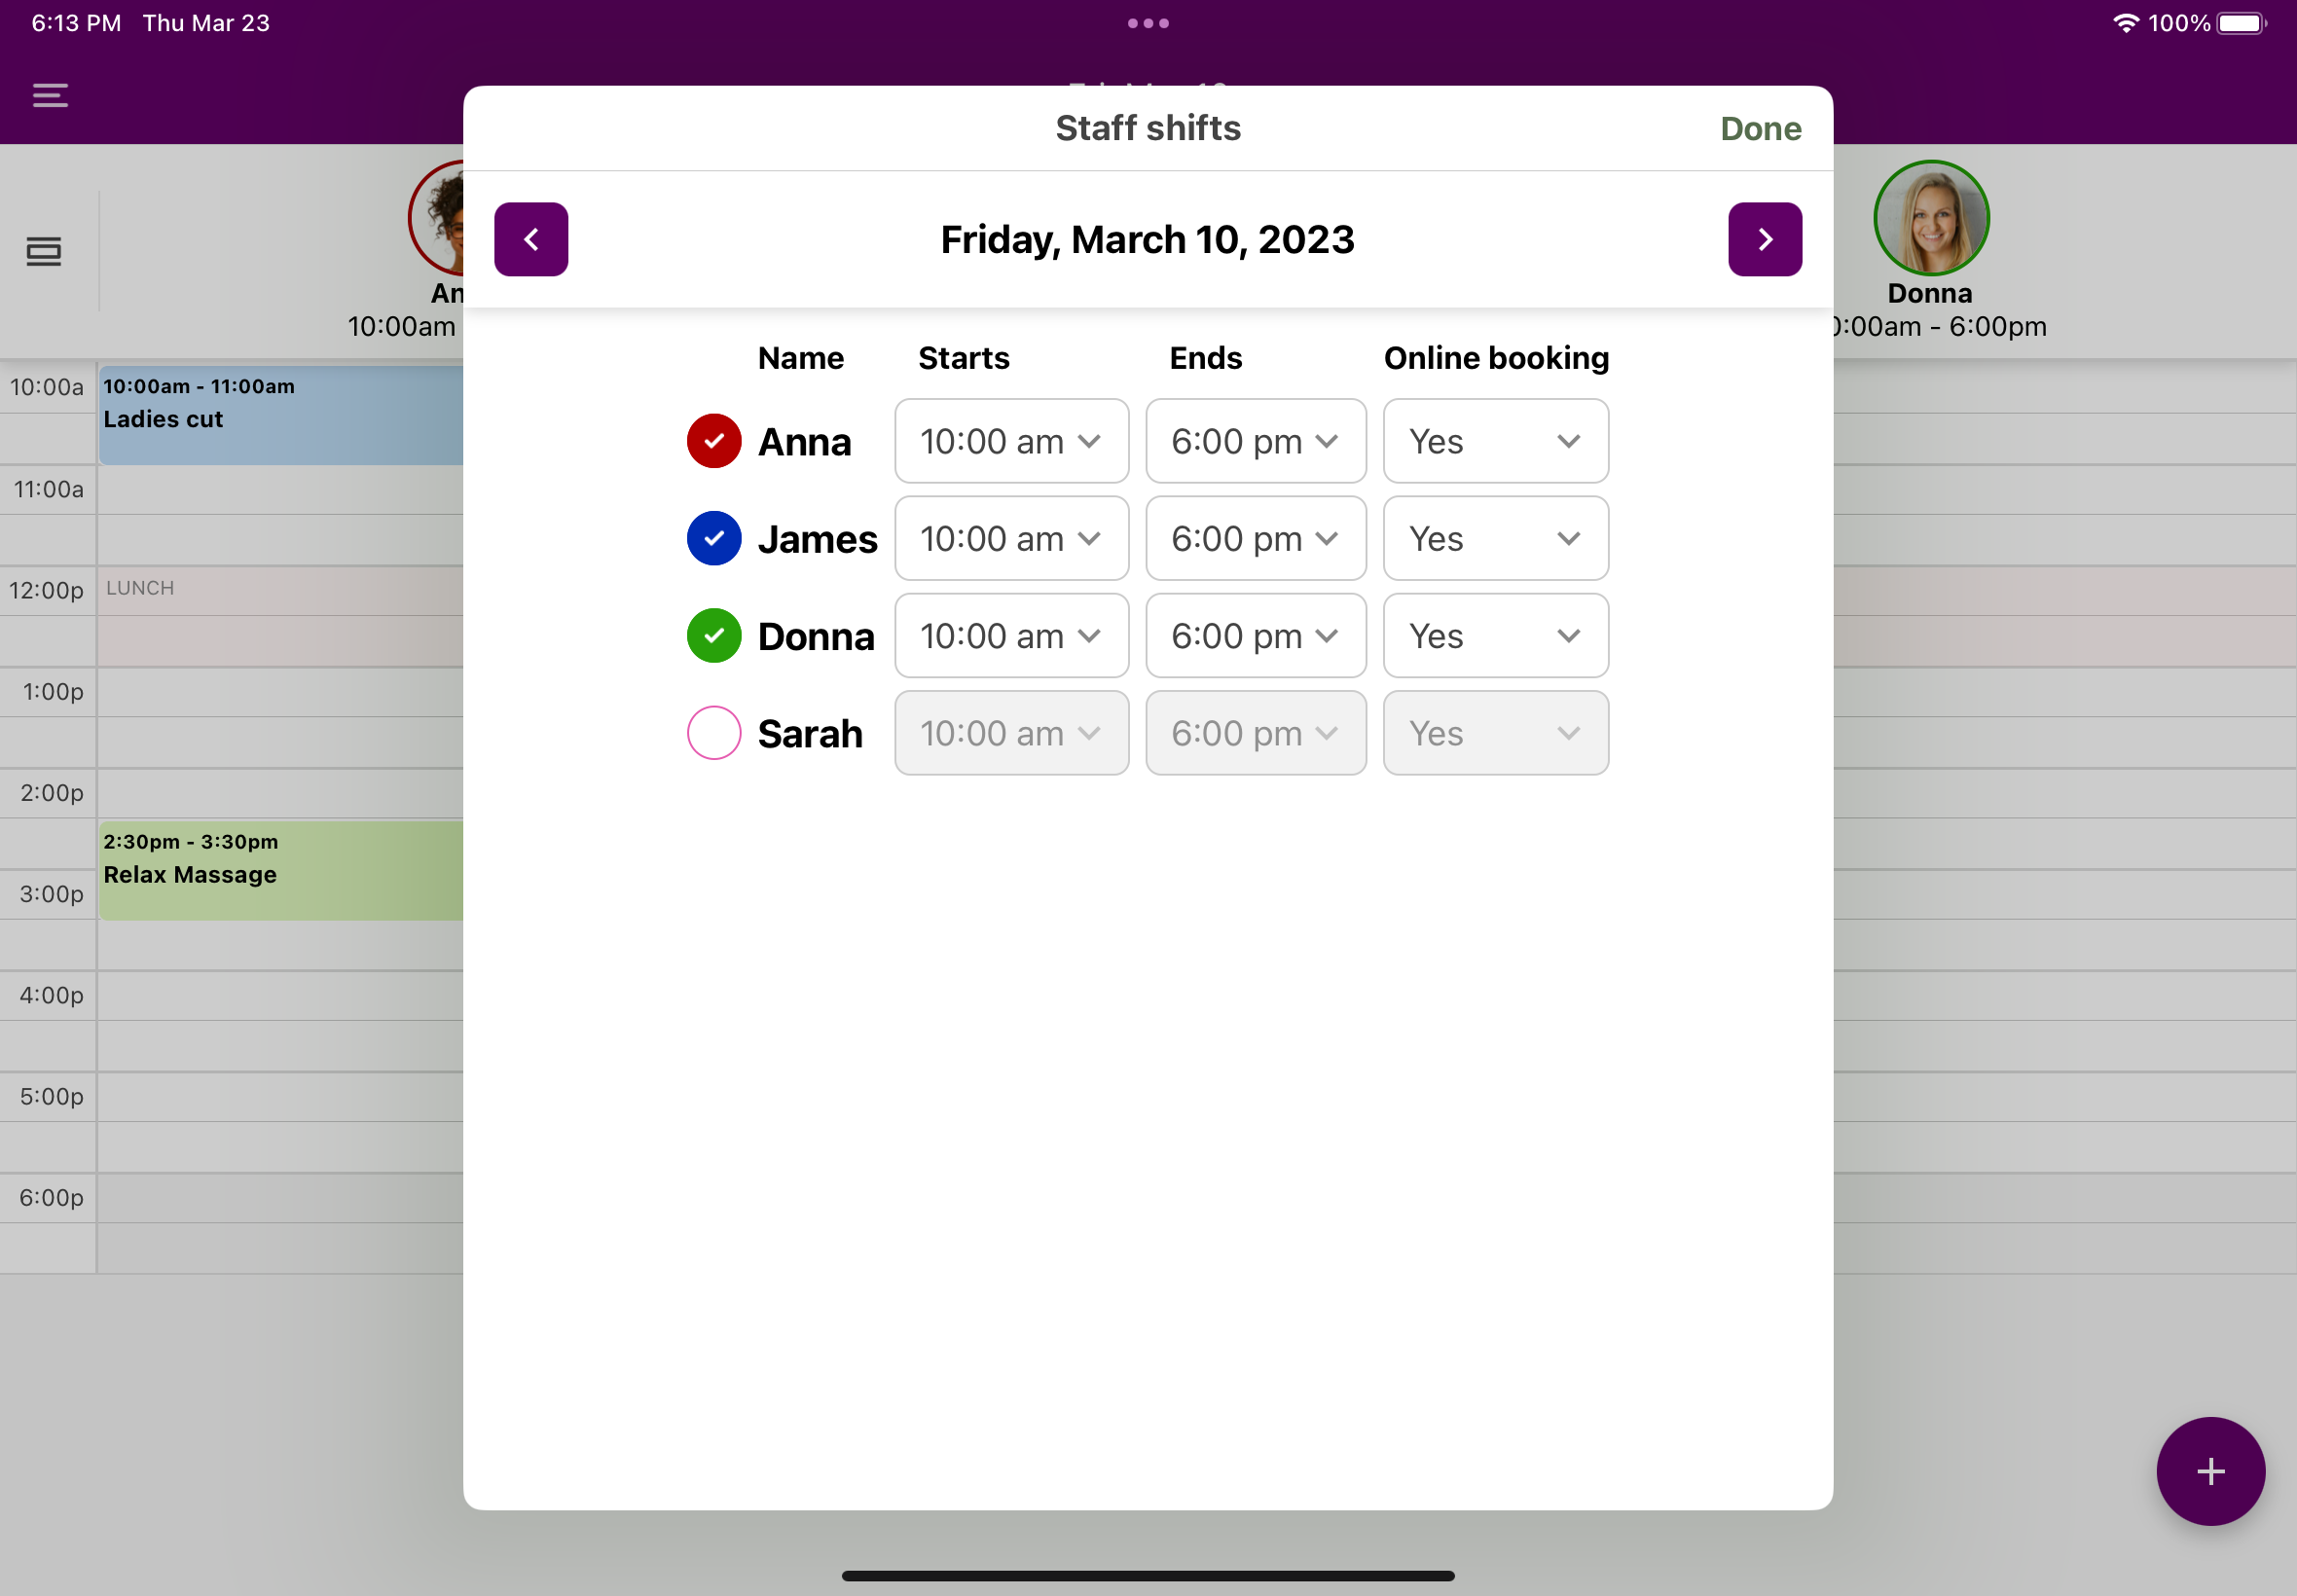 The staff shift screen, which allows for quick and easy modifications of staff shifts.